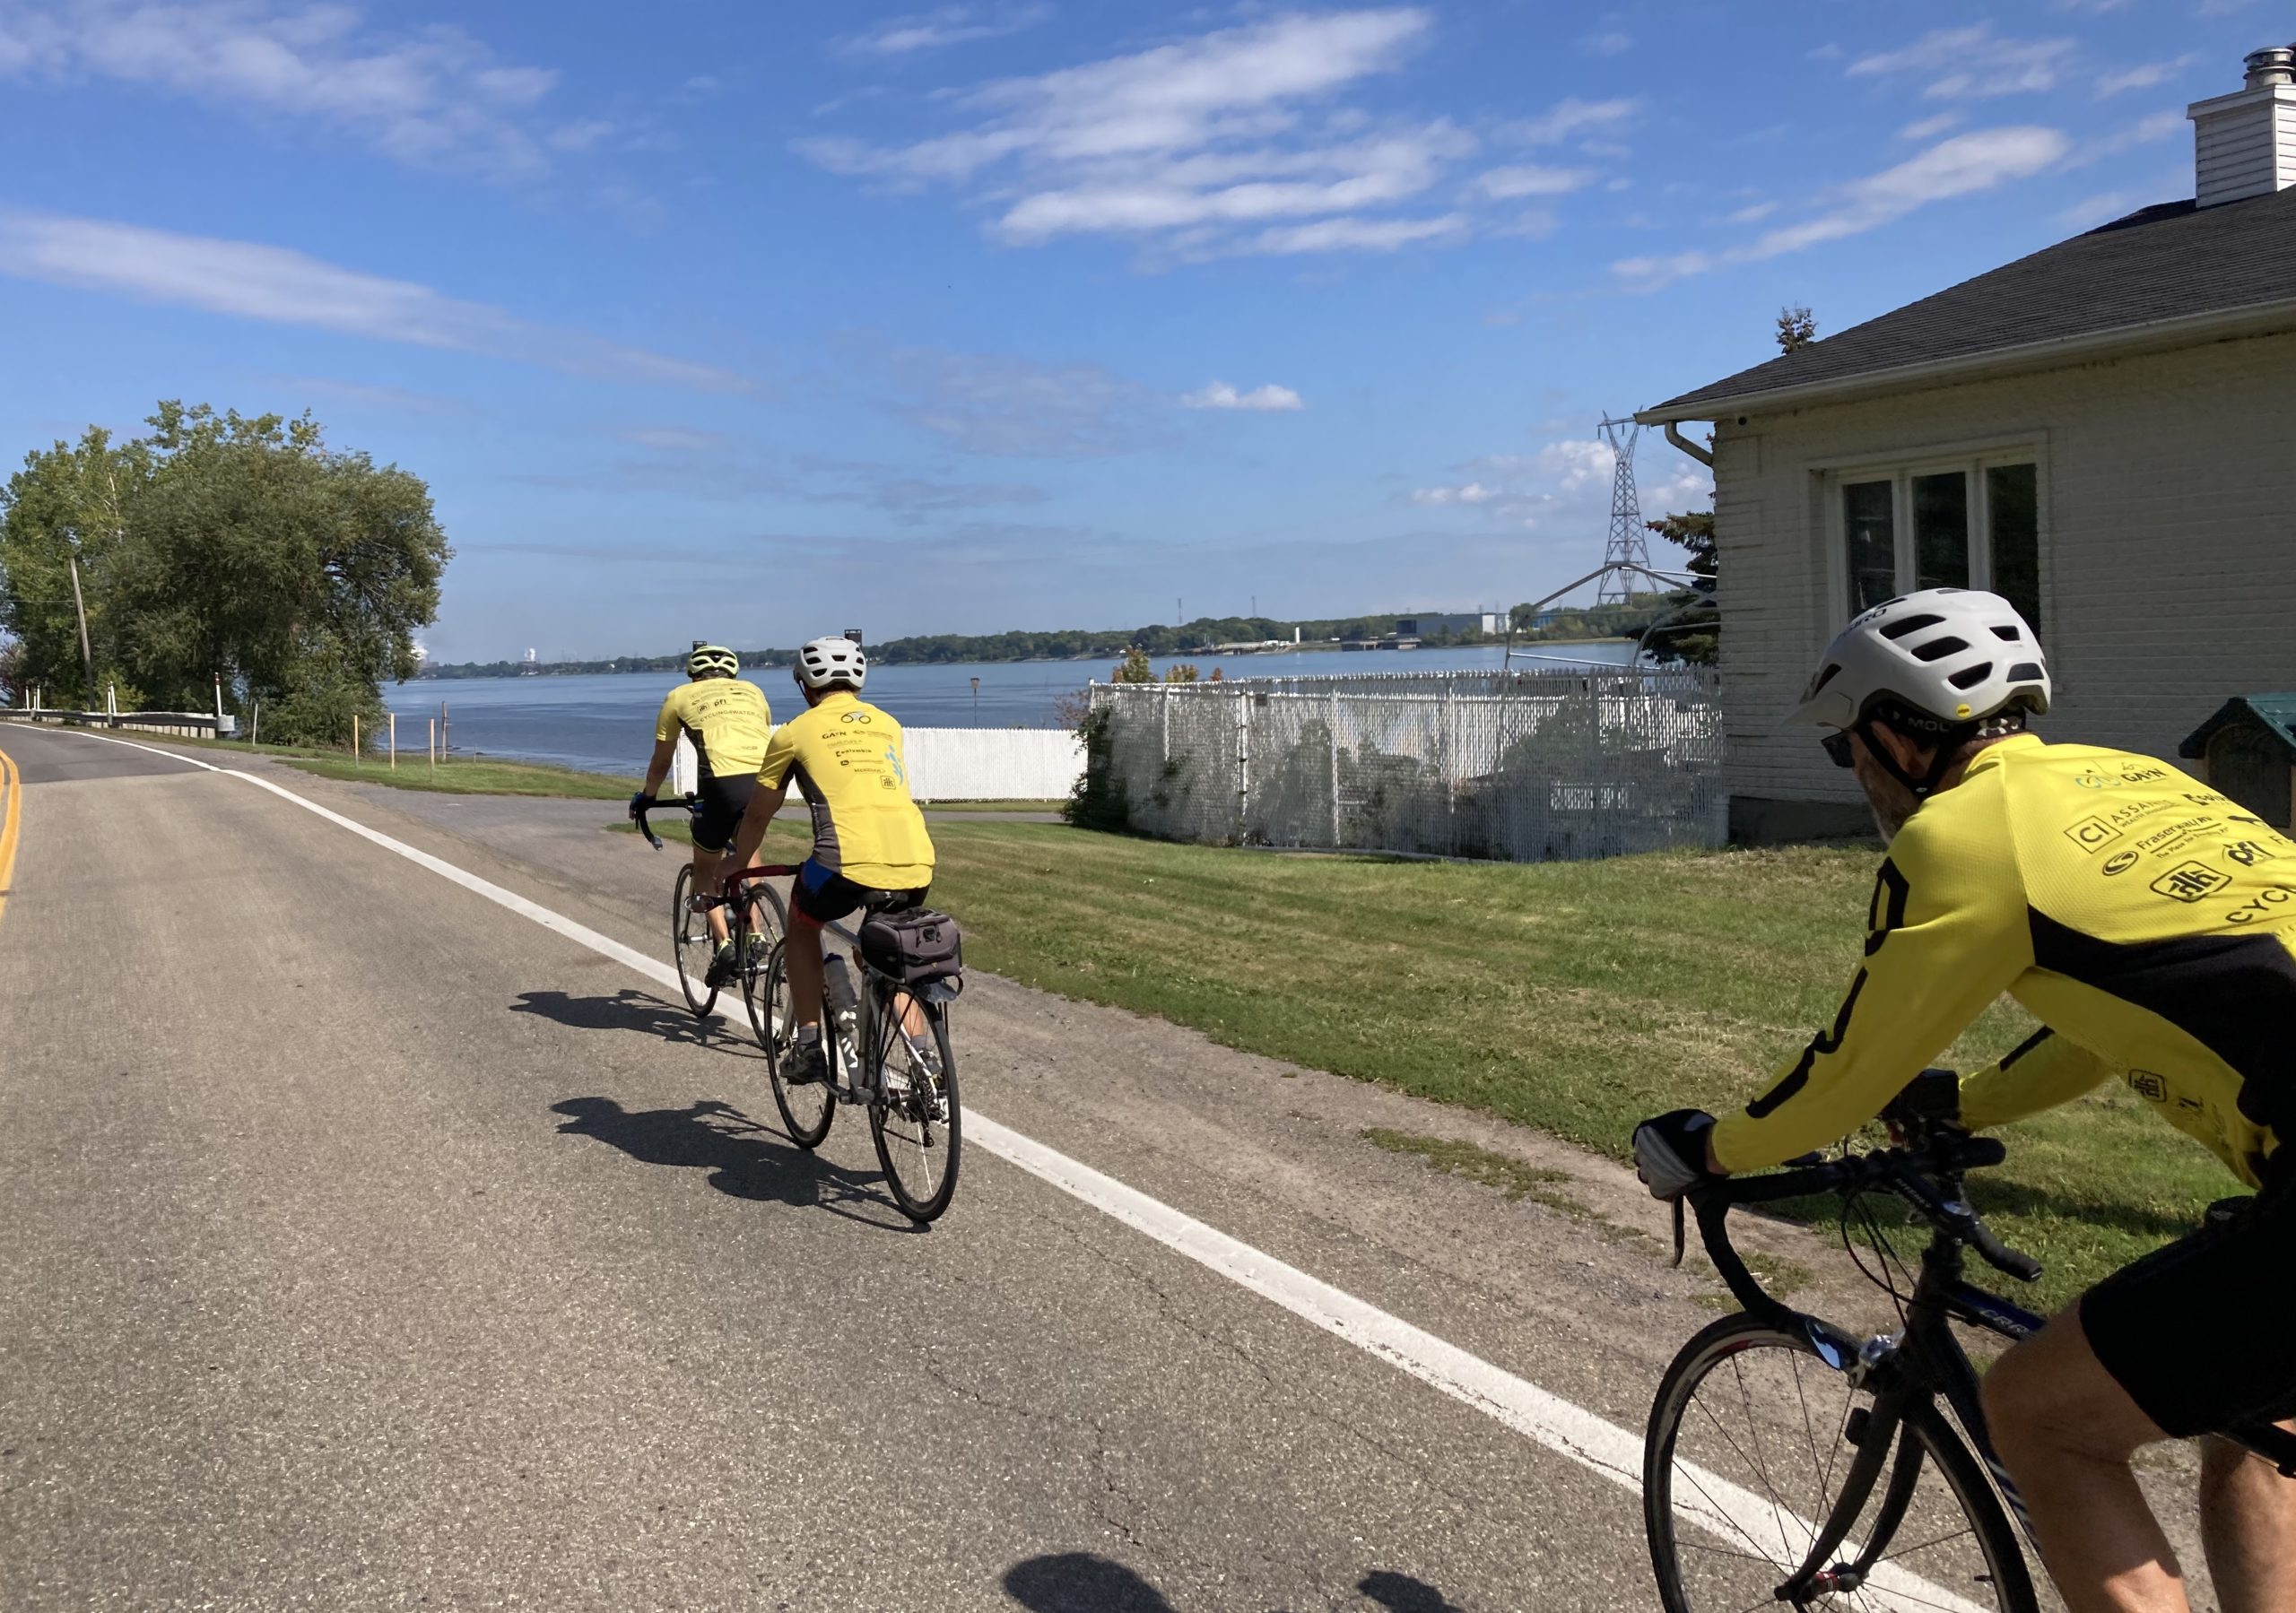 Day 54: Montreal to Trois-Rivieres – 165 KM